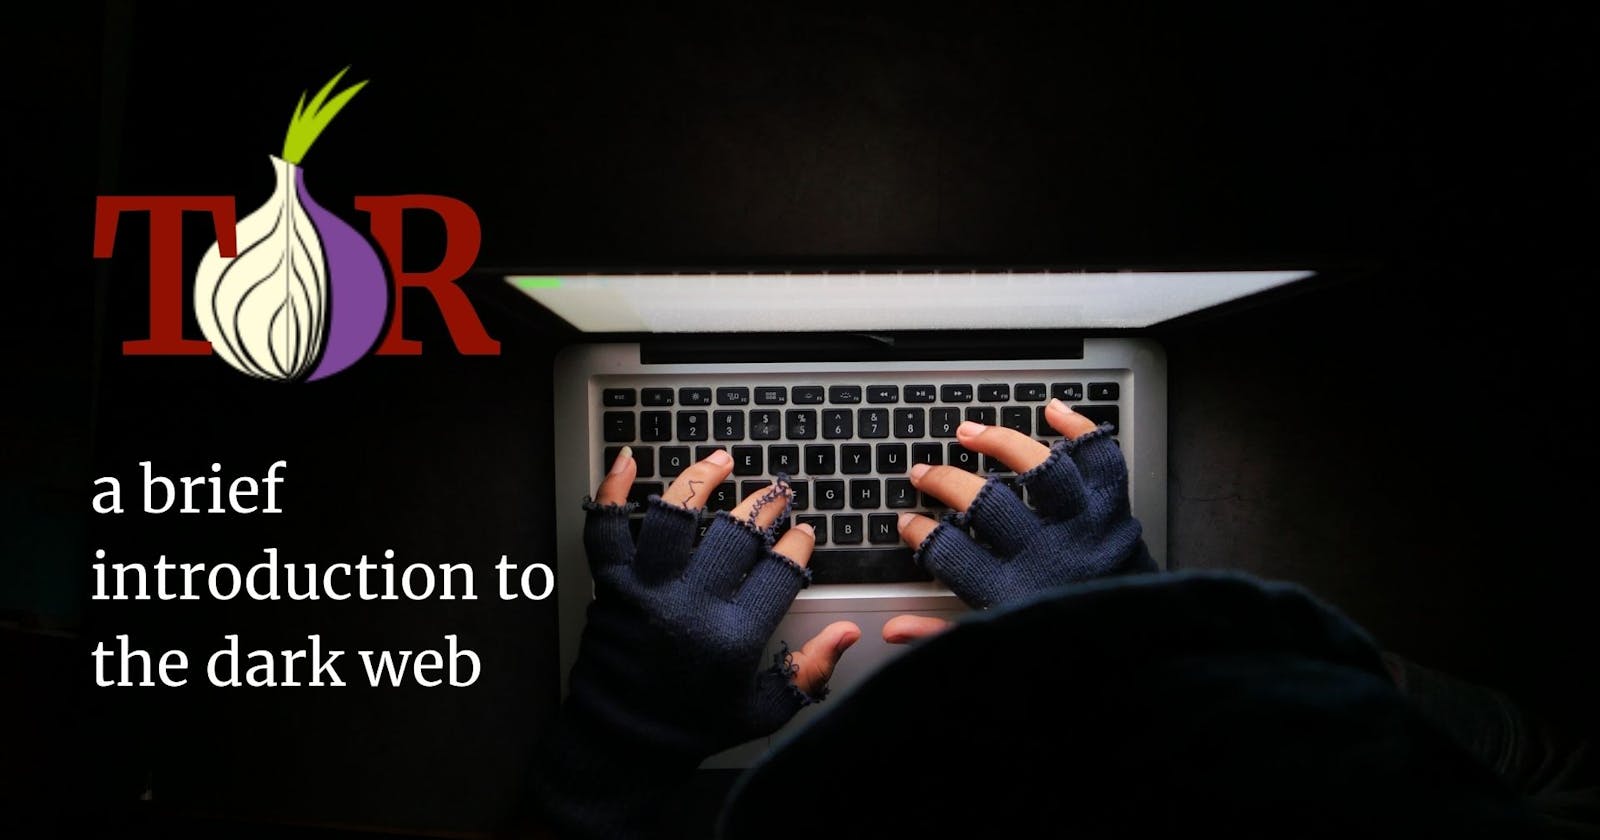 WHAT IS TOR? __ a brief introduction to the dark web.